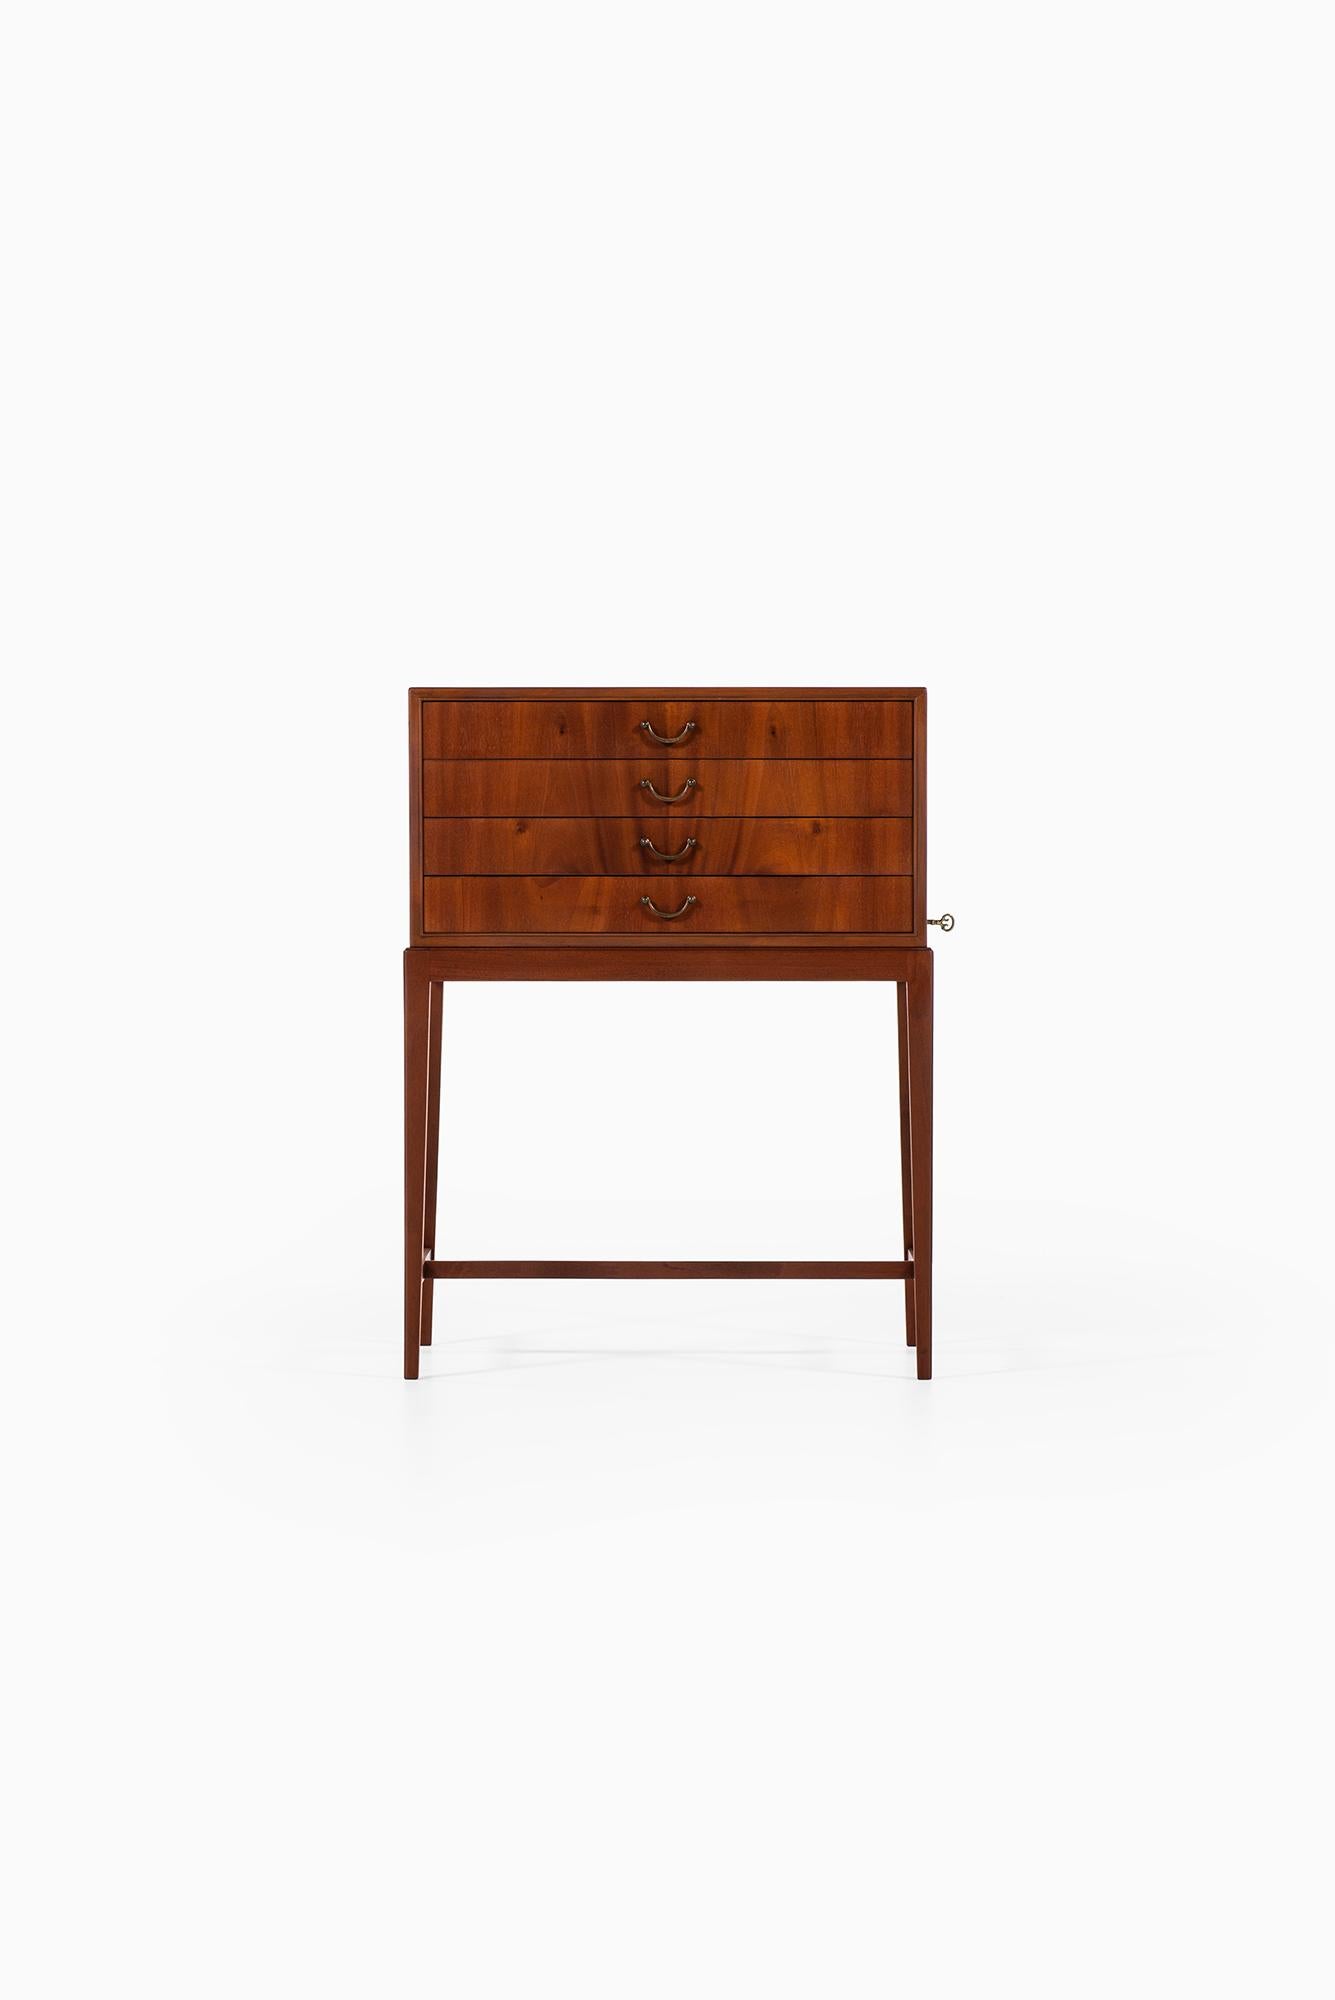 Very rare side table / bureau designed by Frits Henningsen. Produced by Frits Henningsen in Denmark.